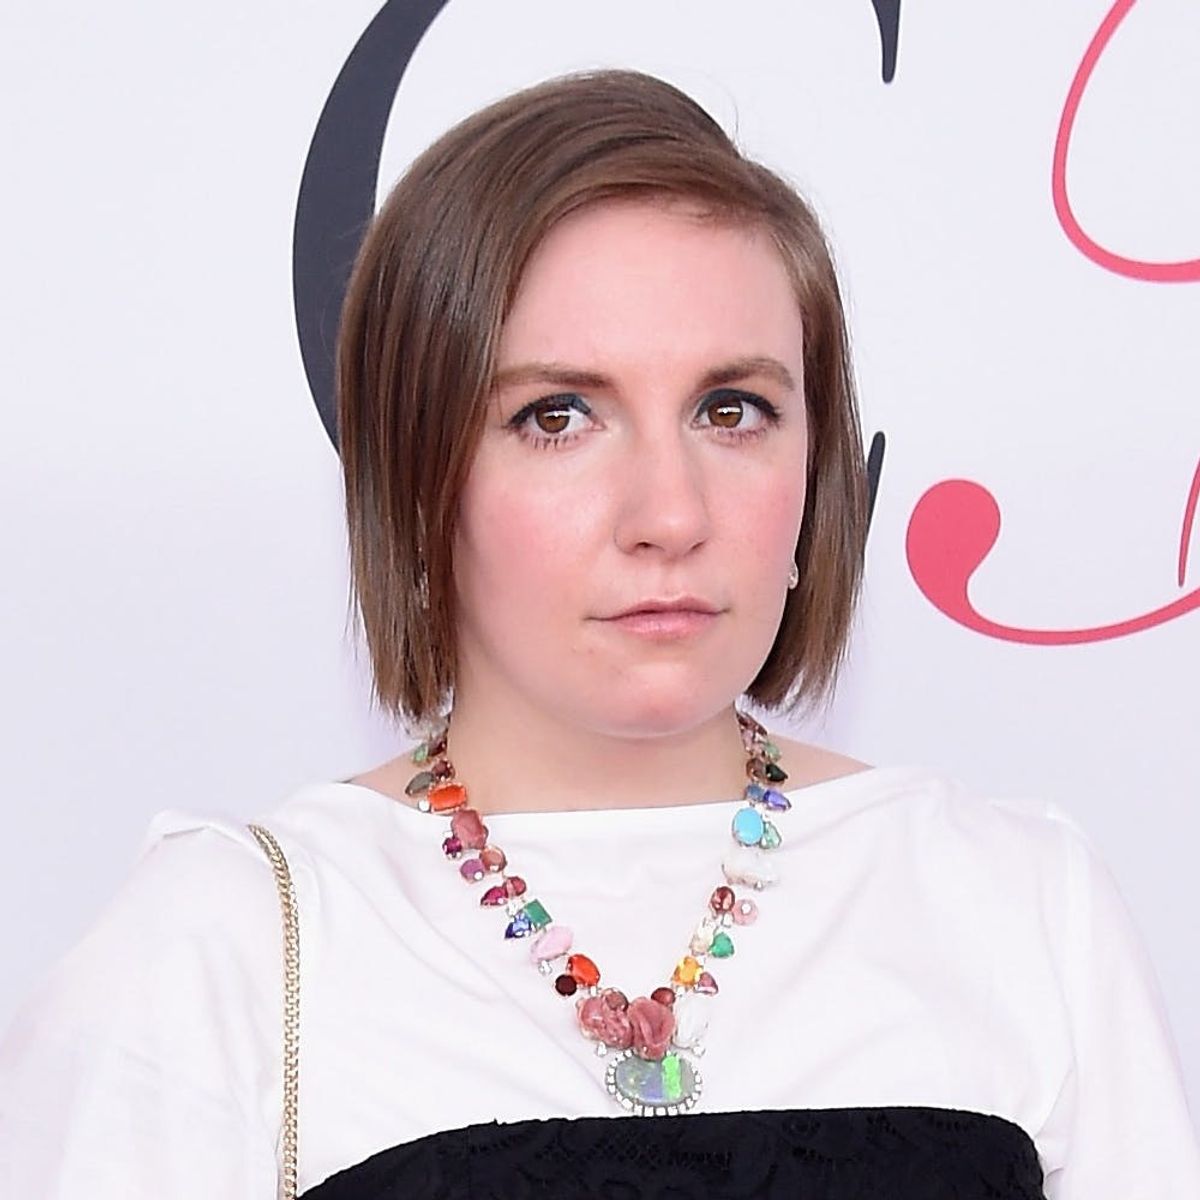 Lena Dunham Defends Taylor Swift While Speaking Out About Kanye’s “Famous” Video